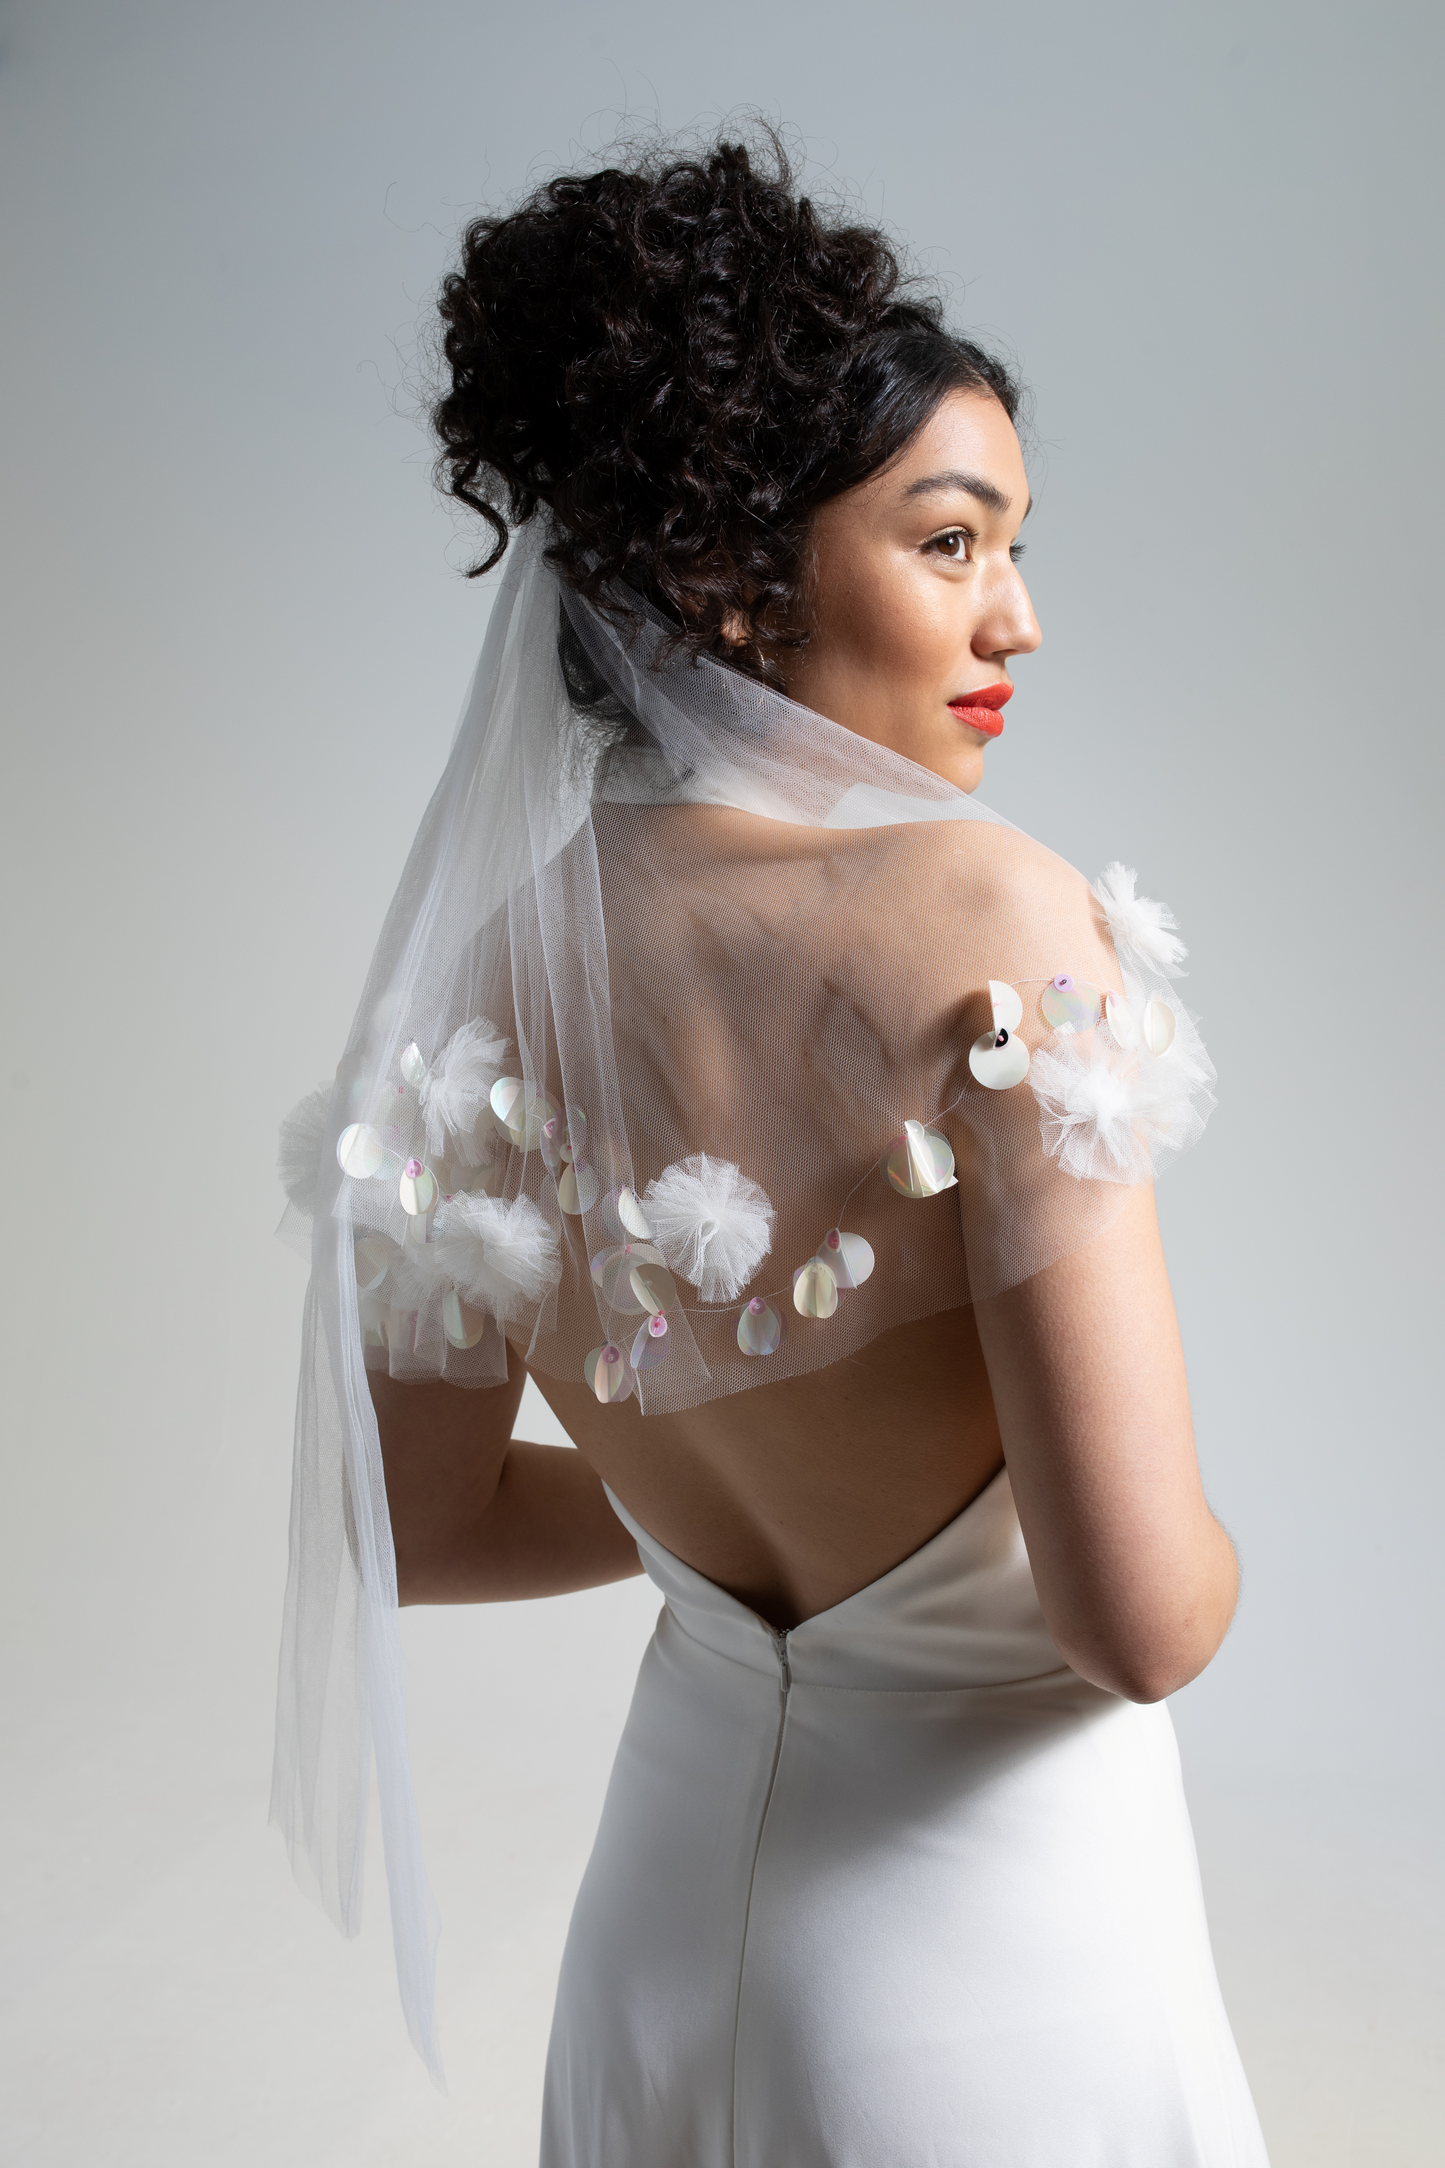 hand embroidered tulle wedding veil embellished with hand sewn sequins and tulle pom poms, an embroidered wedding veil as part of a collection of decorative luxury bridal accessories and bridal headwear and veils